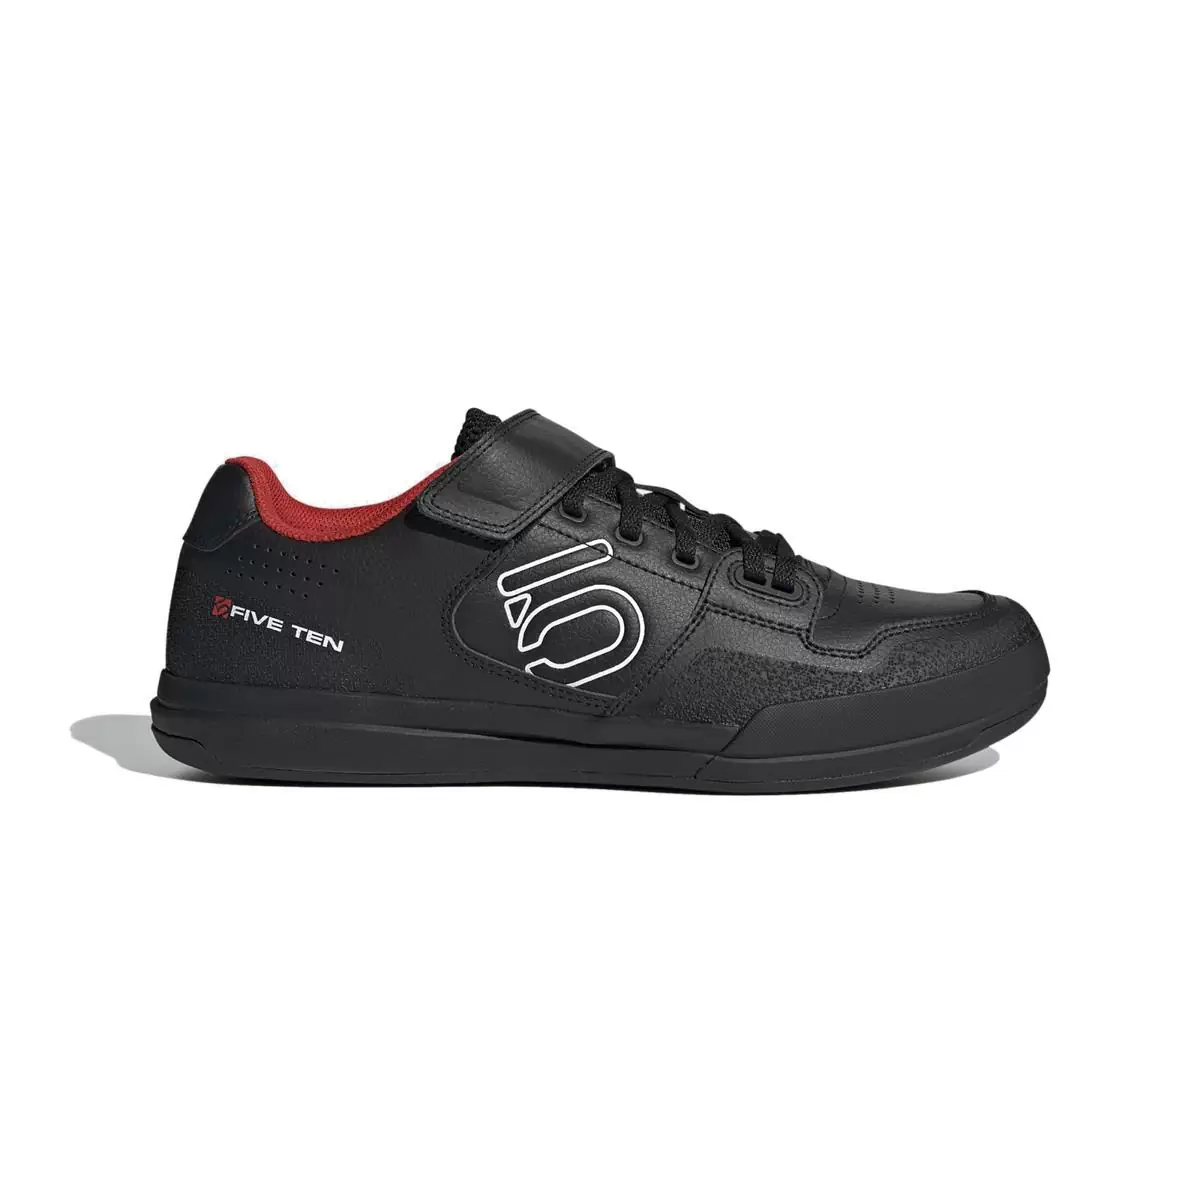 MTB Shoes Hellcat Black/Red Size 40,5 - image